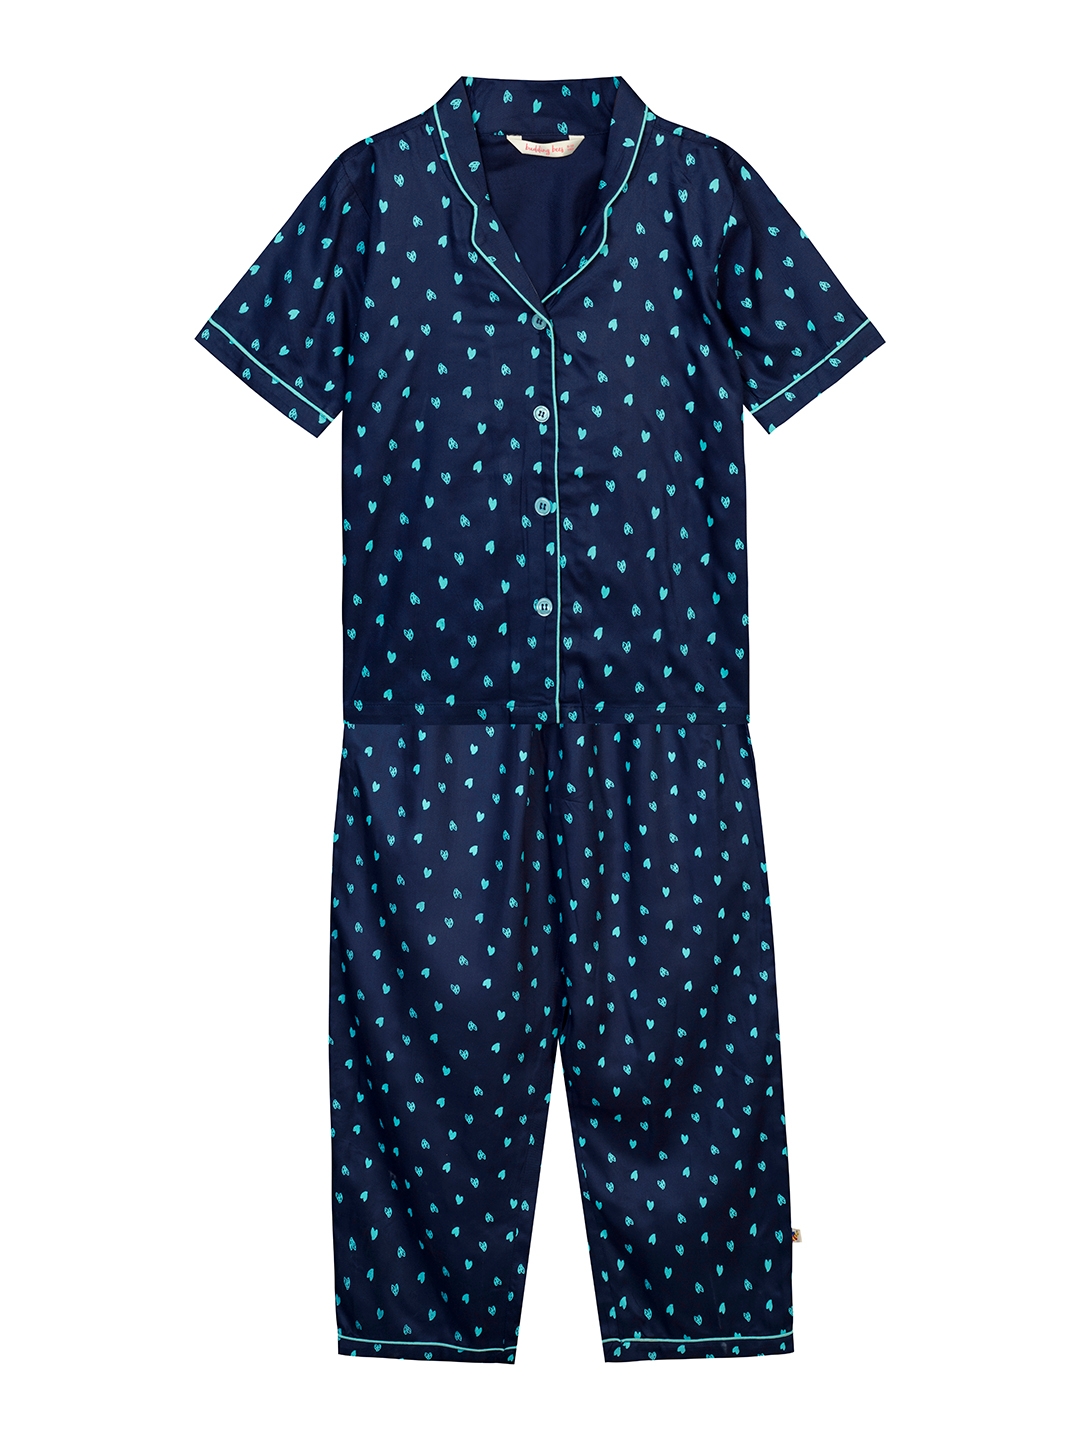 Budding Bees | Budding Bees Girls Blue Heart Printed Nightsuit